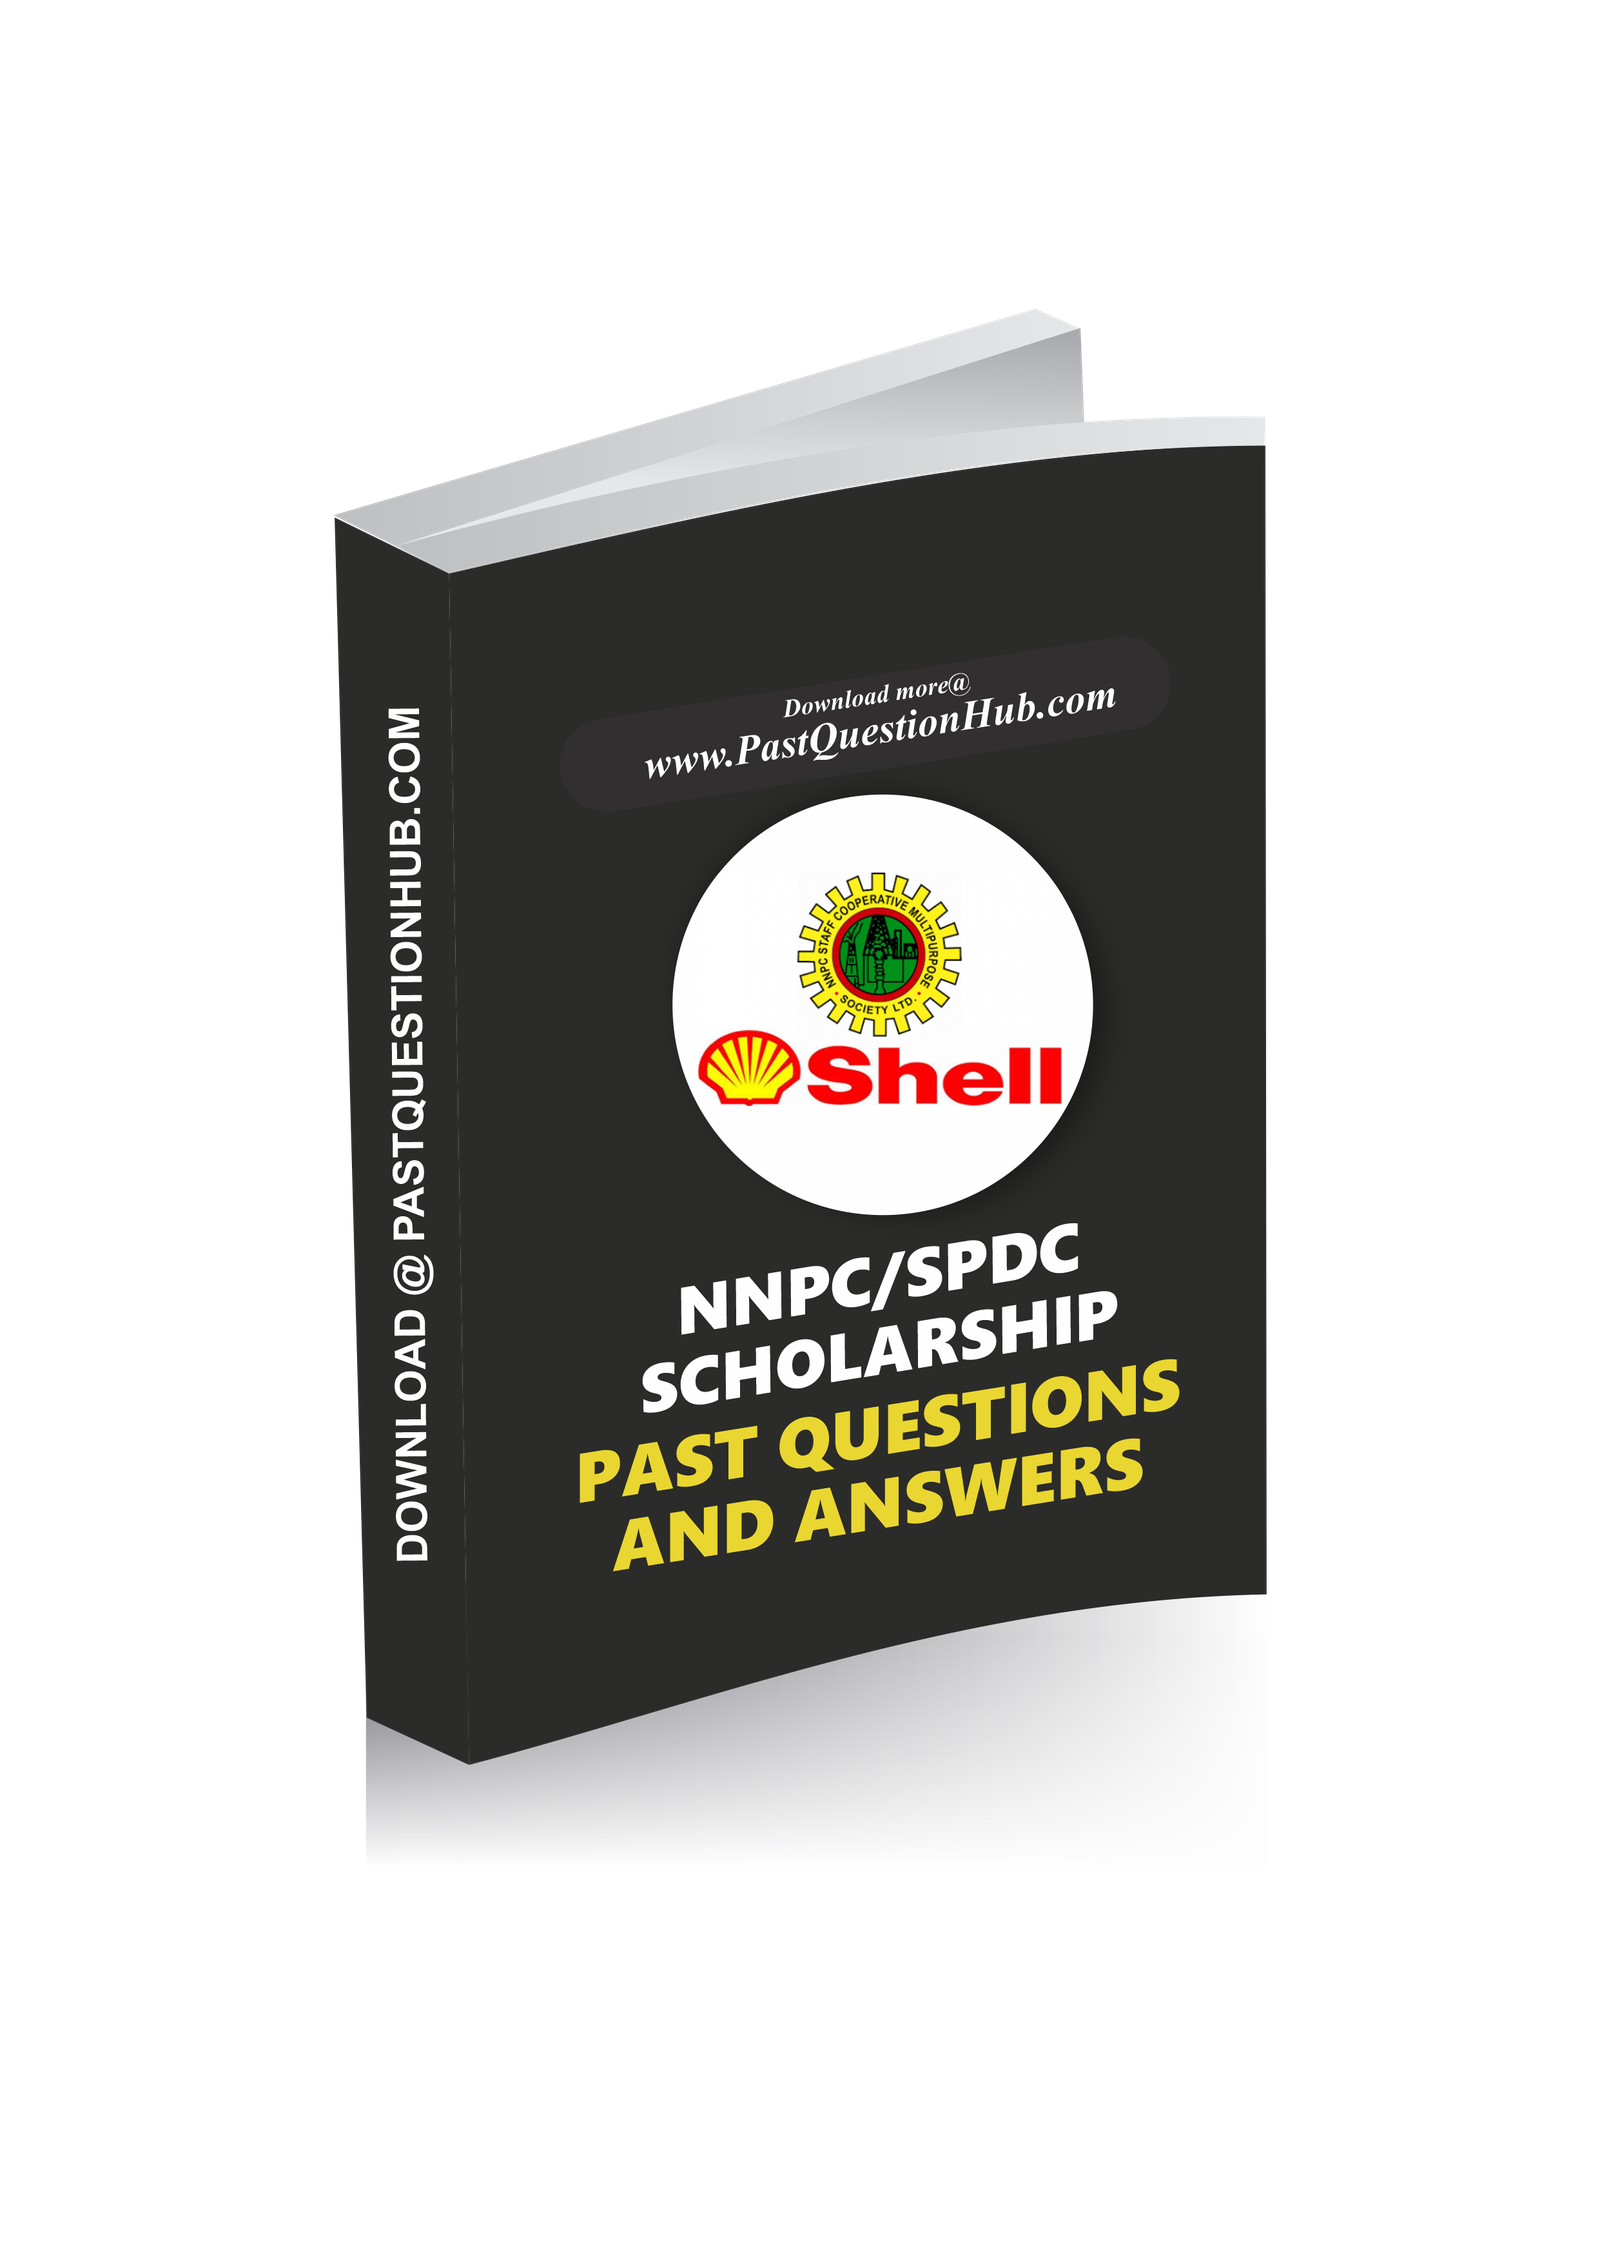 NNPC/SPDC Scholarship Past Questions